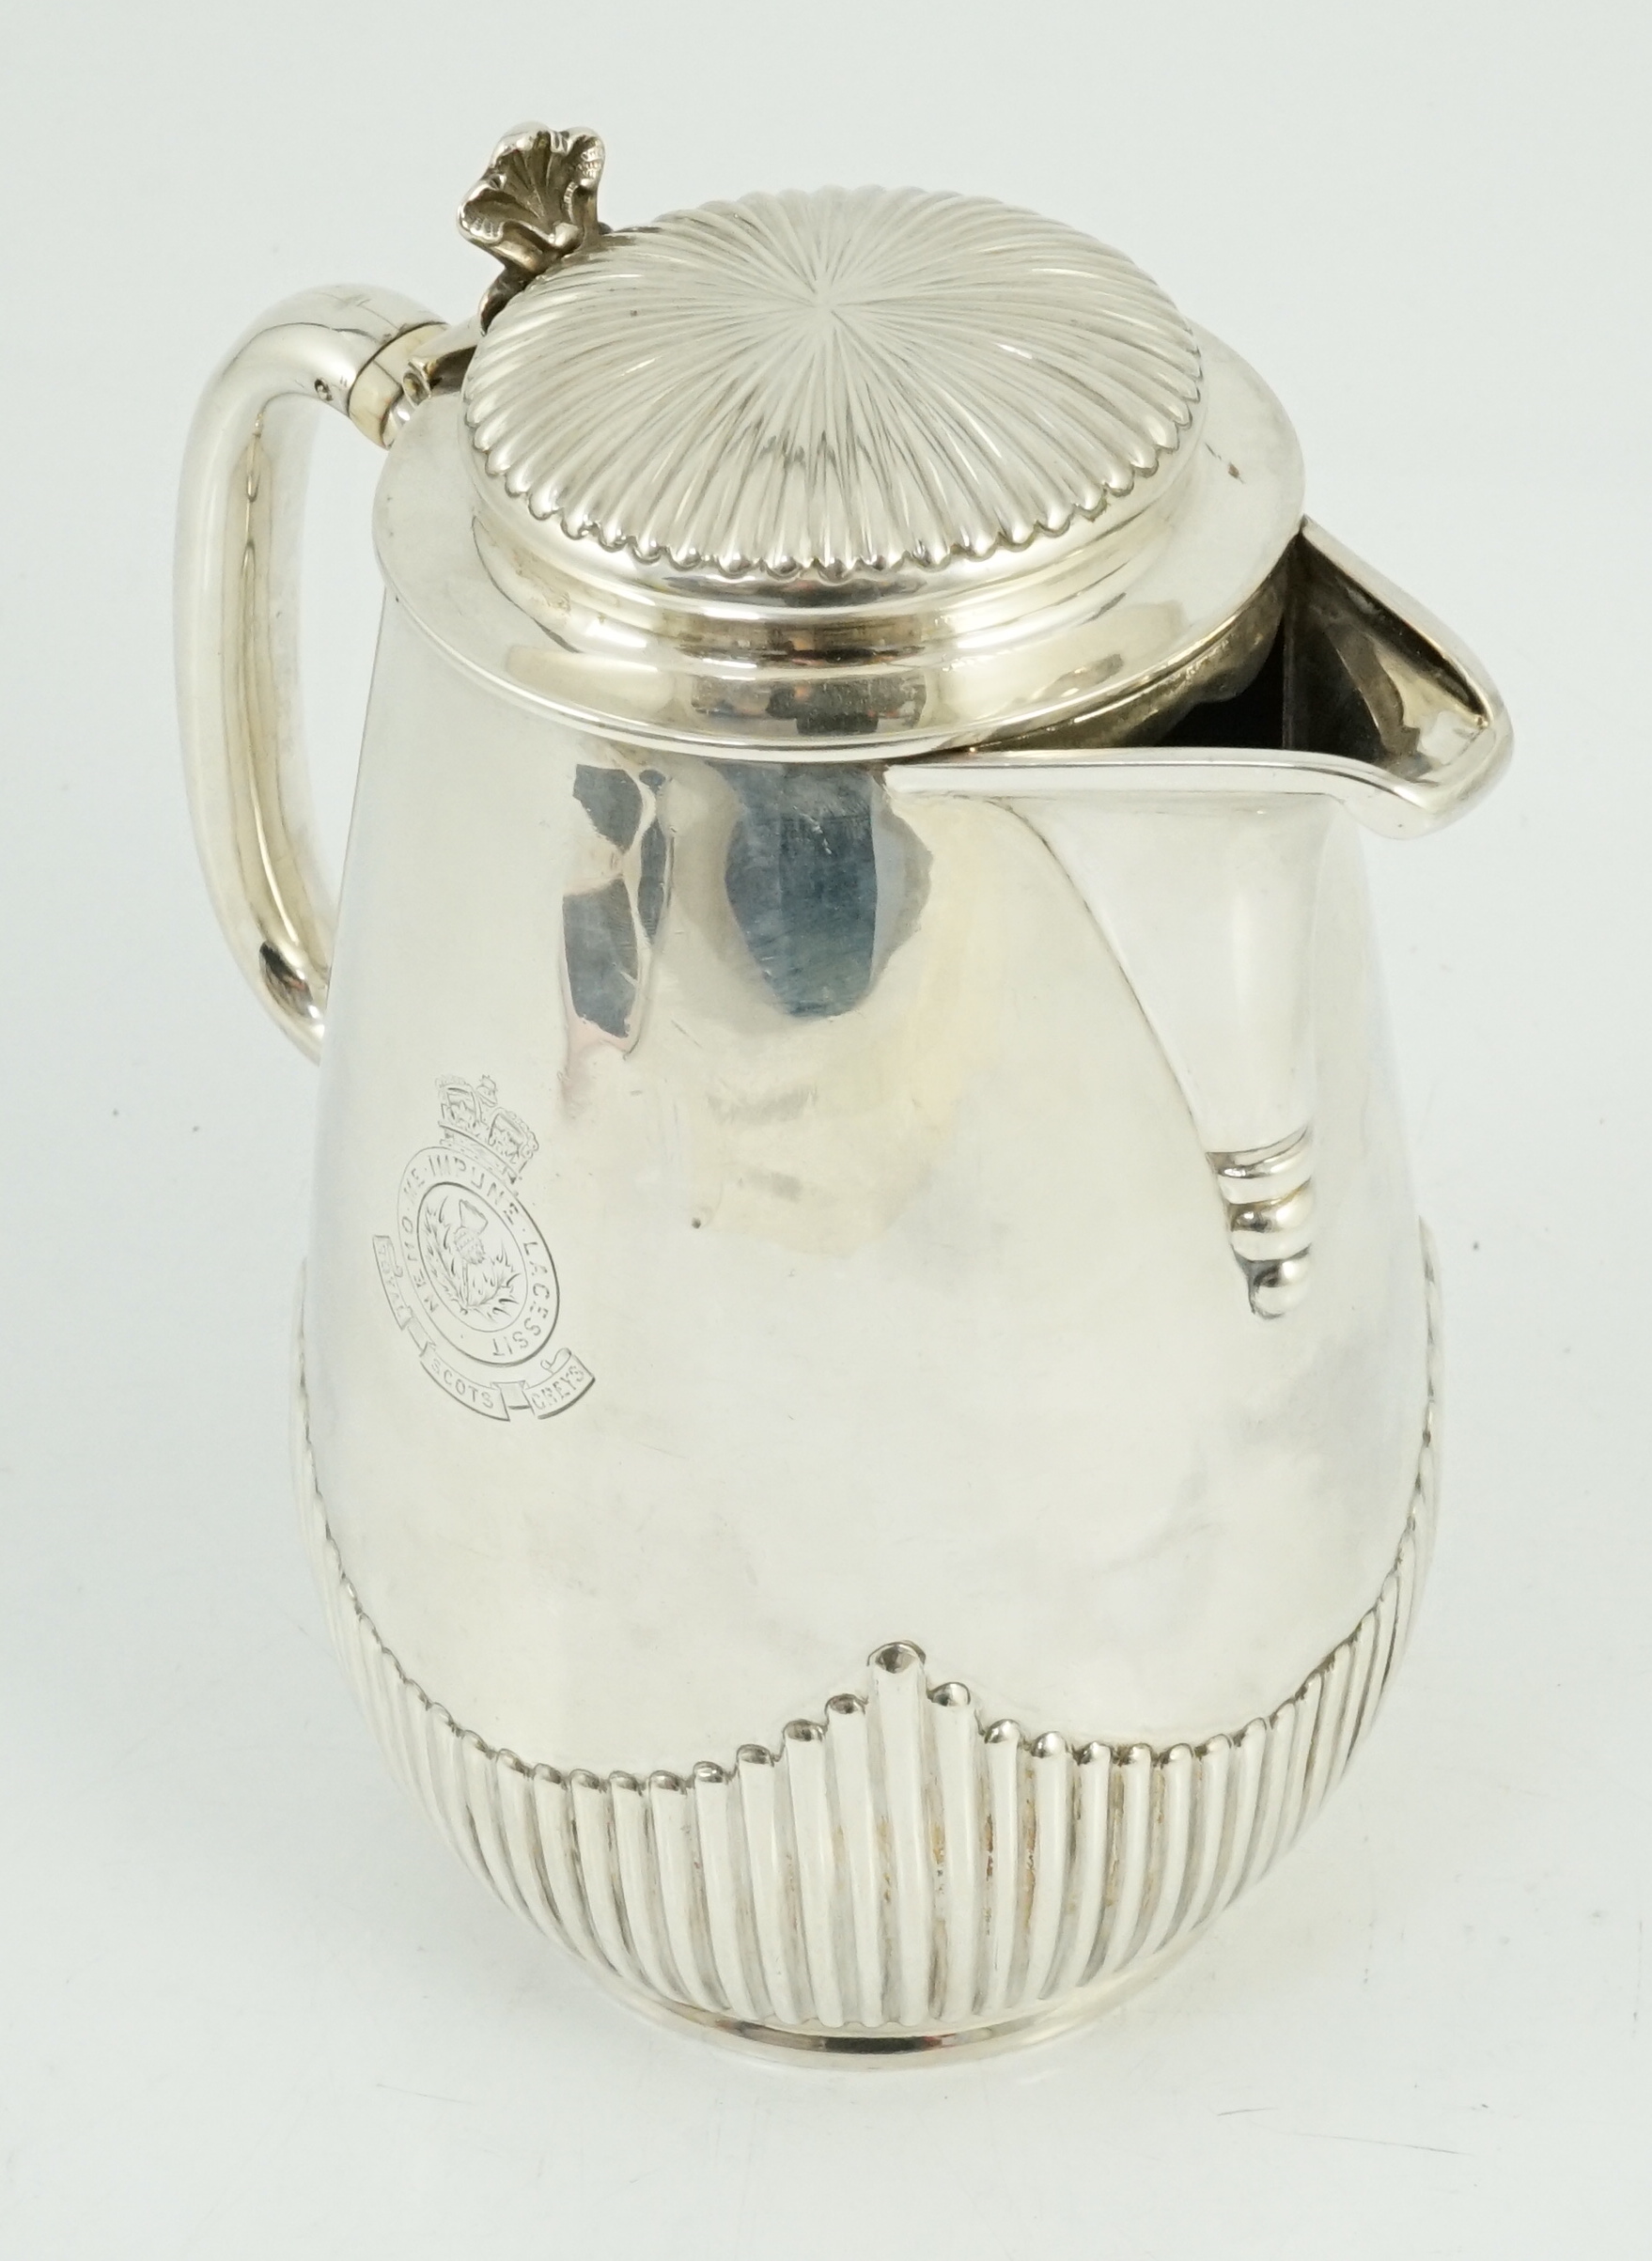 The Royal Scots Greys. A Victorian Scottish silver hotwater pot, Hamilton & Inches, Edinburgh, 1882, - Image 5 of 8